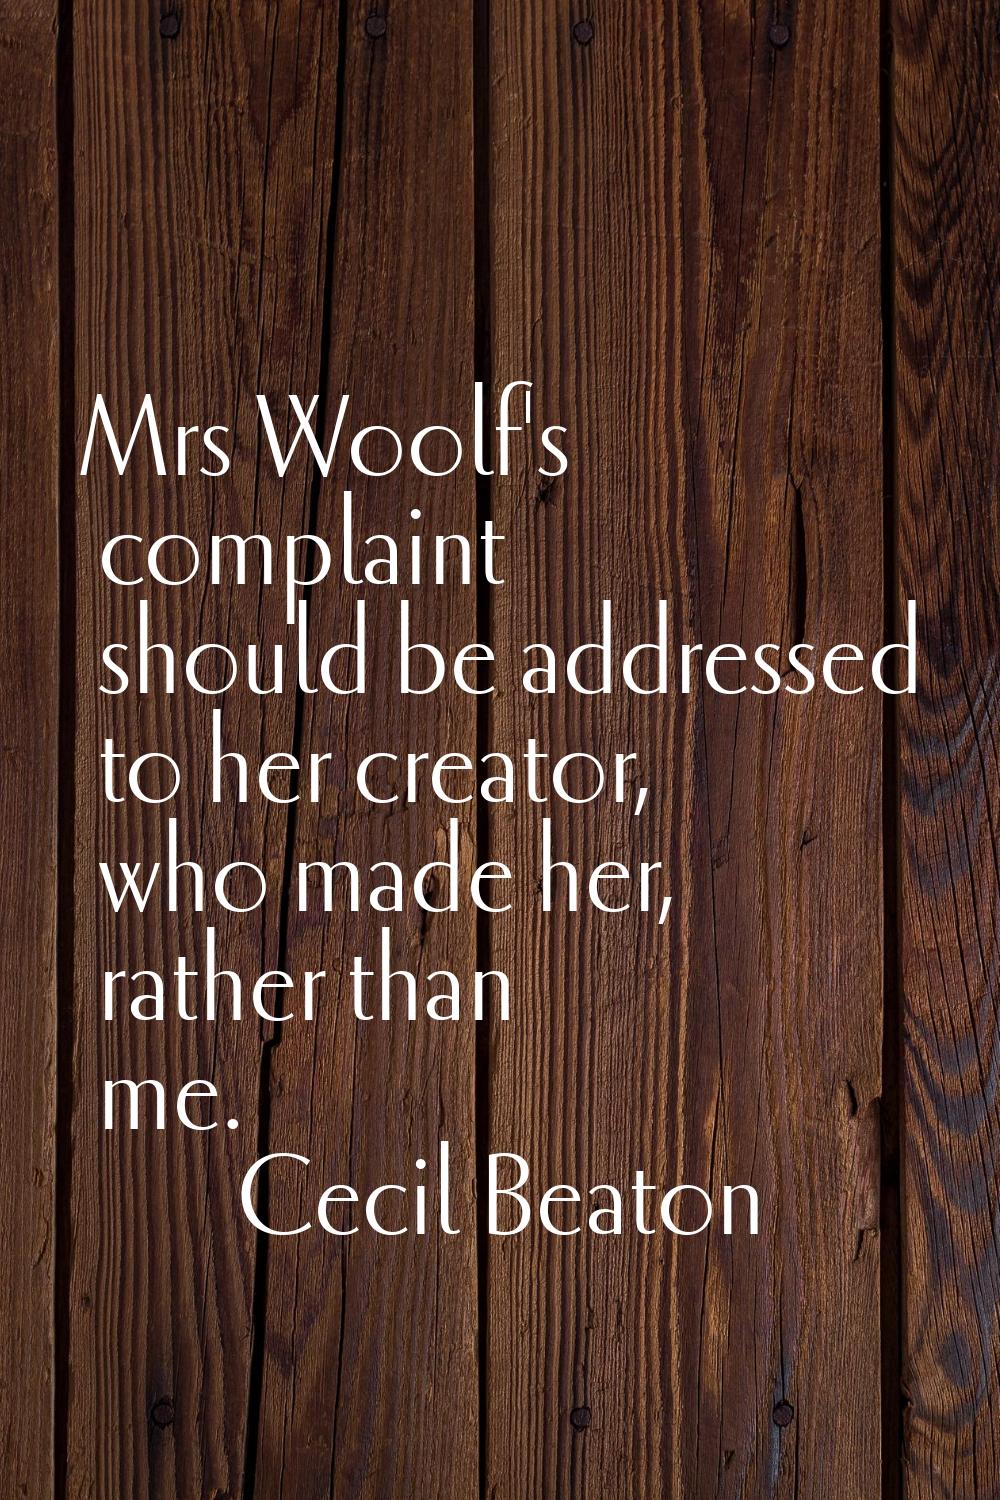 Mrs Woolf's complaint should be addressed to her creator, who made her, rather than me.